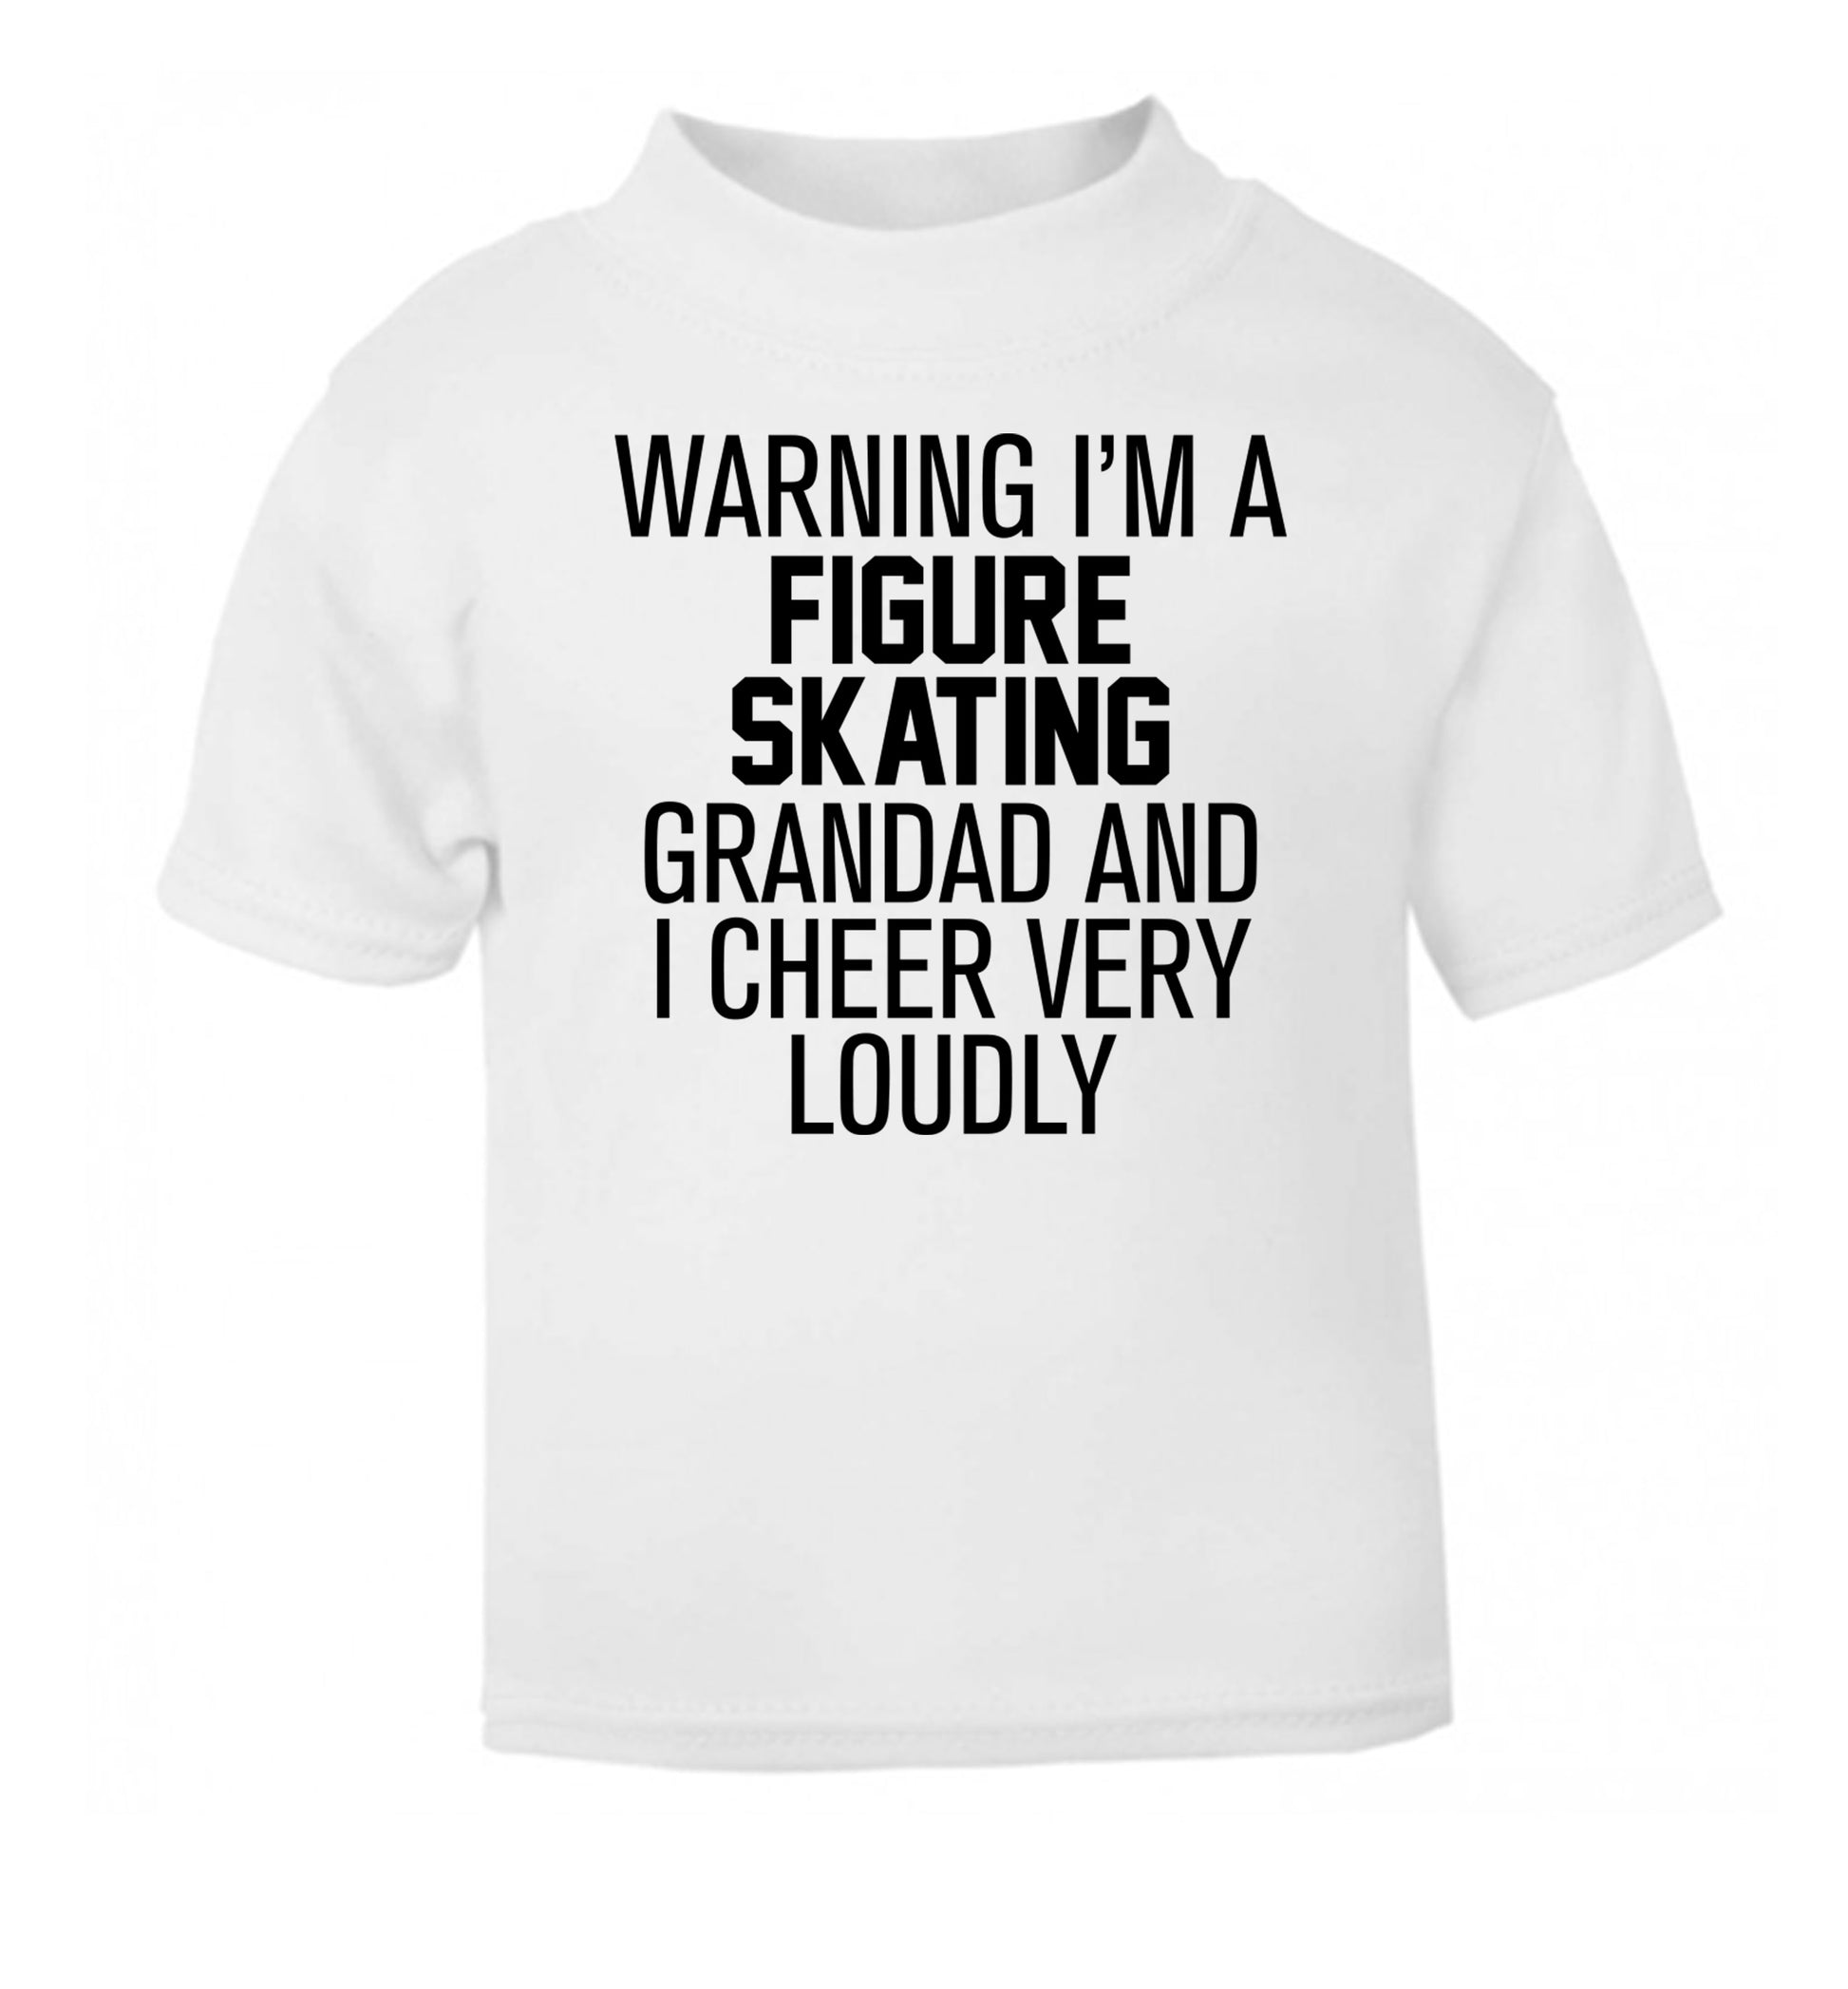 Warning I'm a figure skating grandad and I cheer very loudly white Baby Toddler Tshirt 2 Years